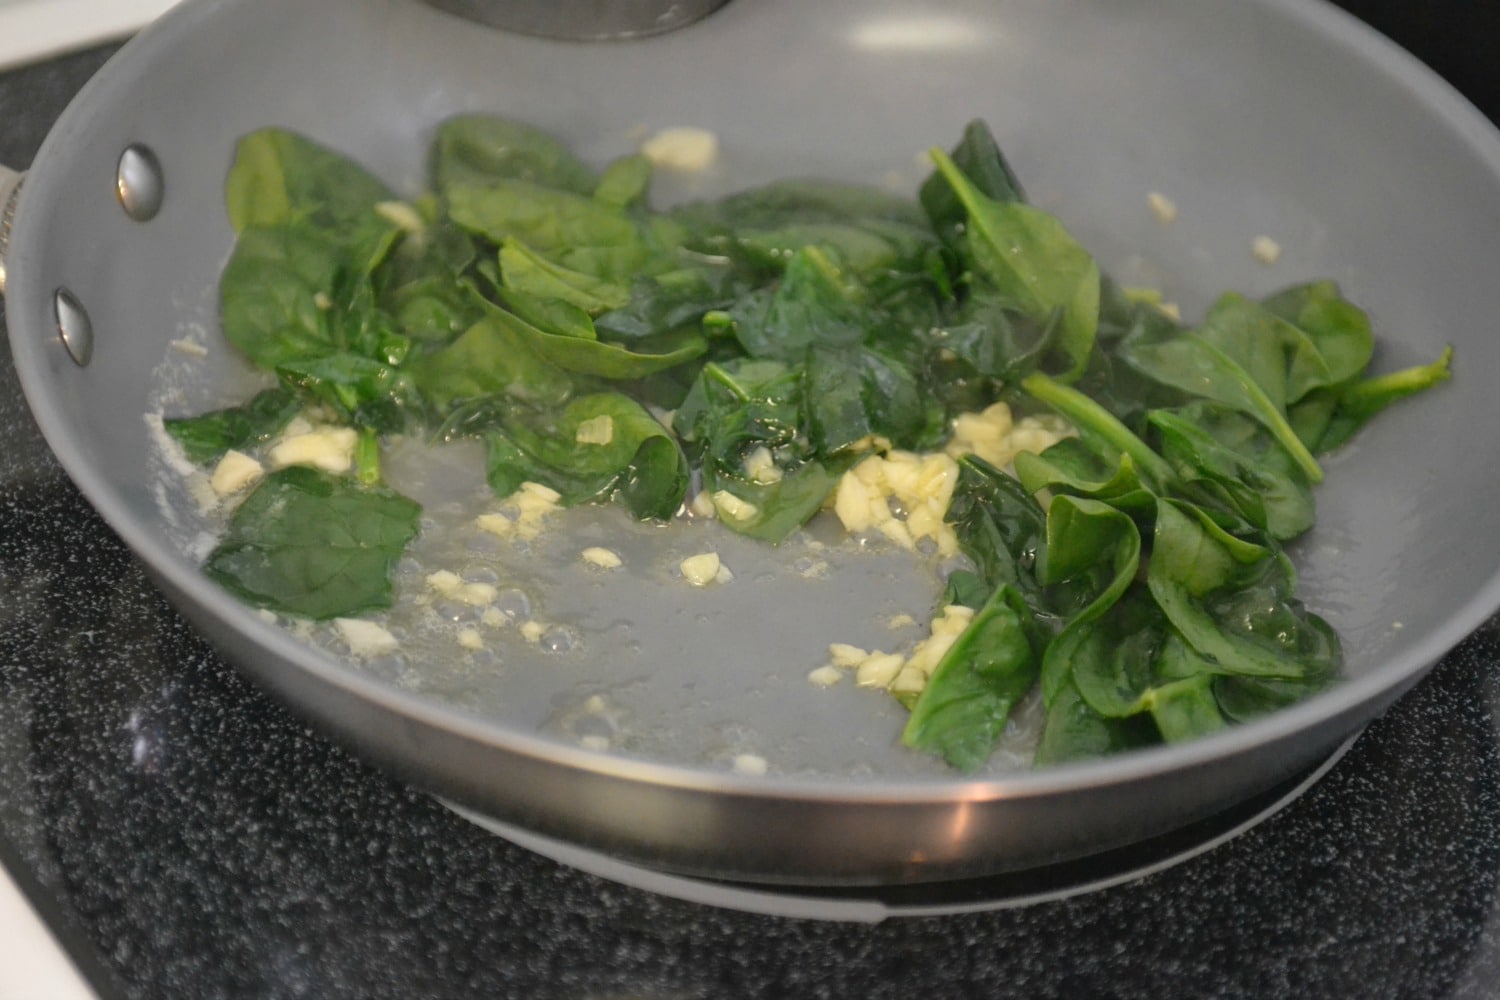 Saute the spinach with garlic and olive oil in a pan. 